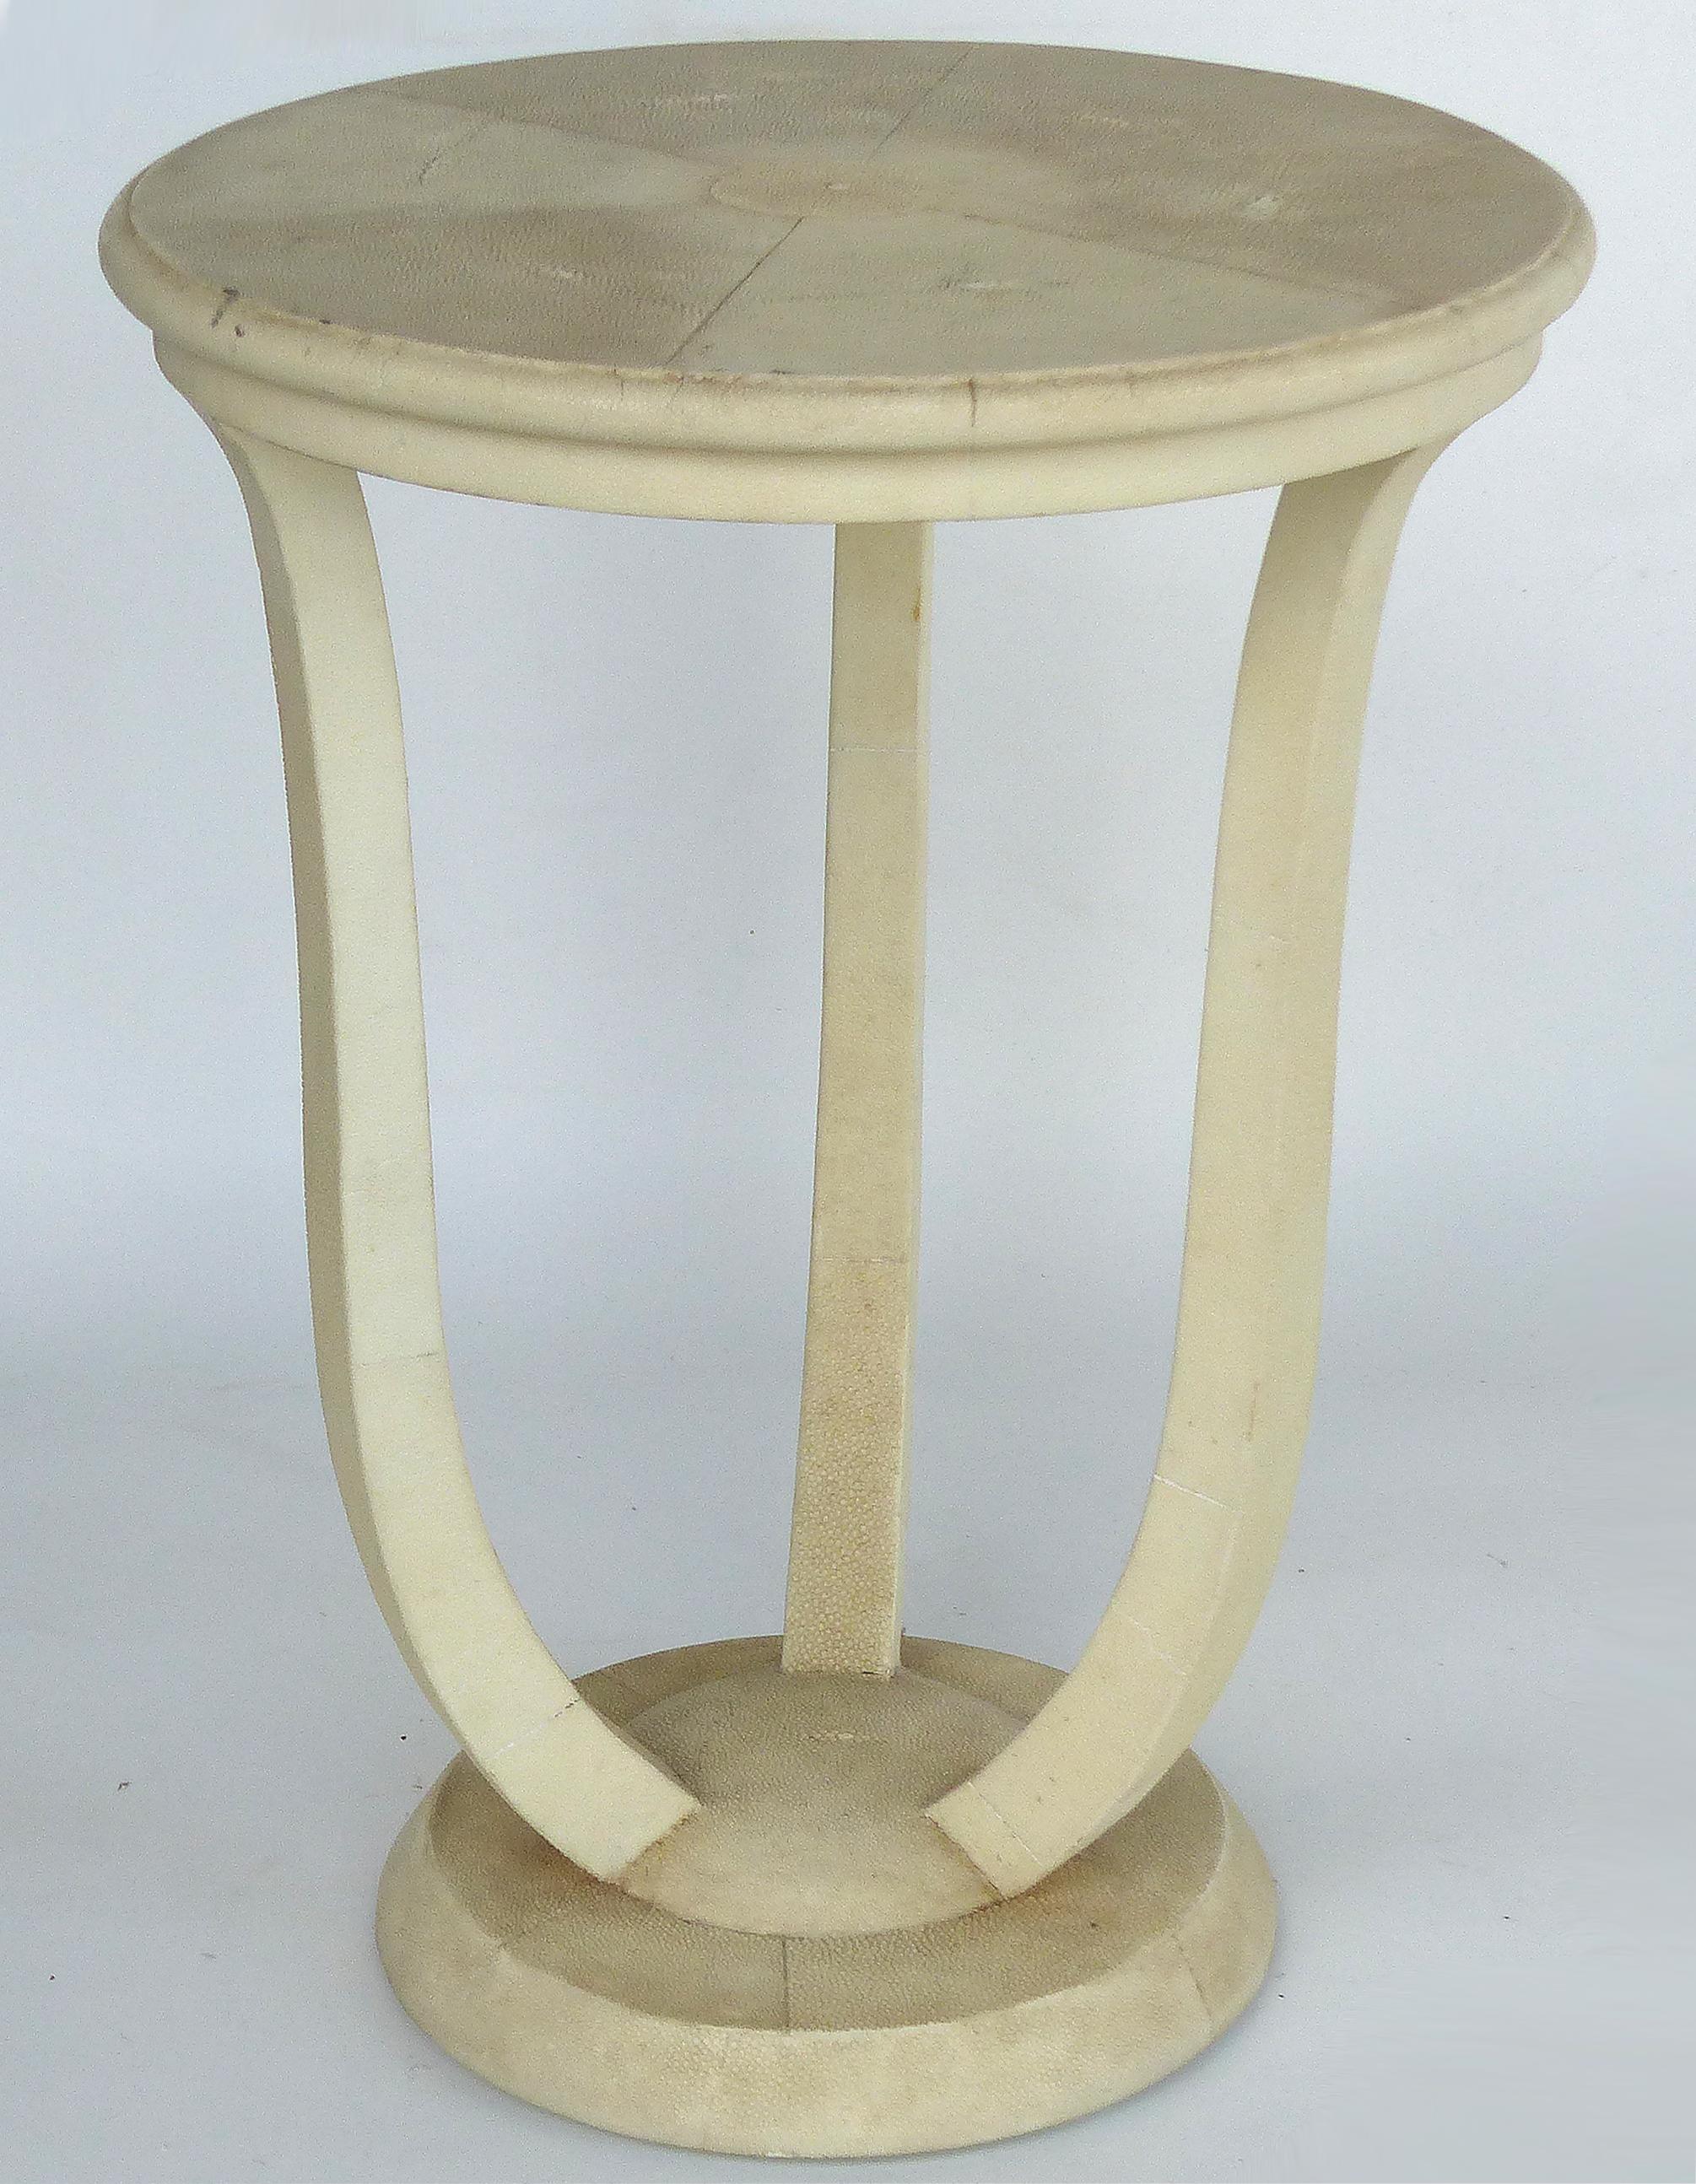 Maitland Smith Tri-Leg Shagreen Side Table

Offered for sale is an occasional table by Maitland Smith clad in an ivory colored shagreen. The tri-leg table has a round base and a round top which measures 18.75